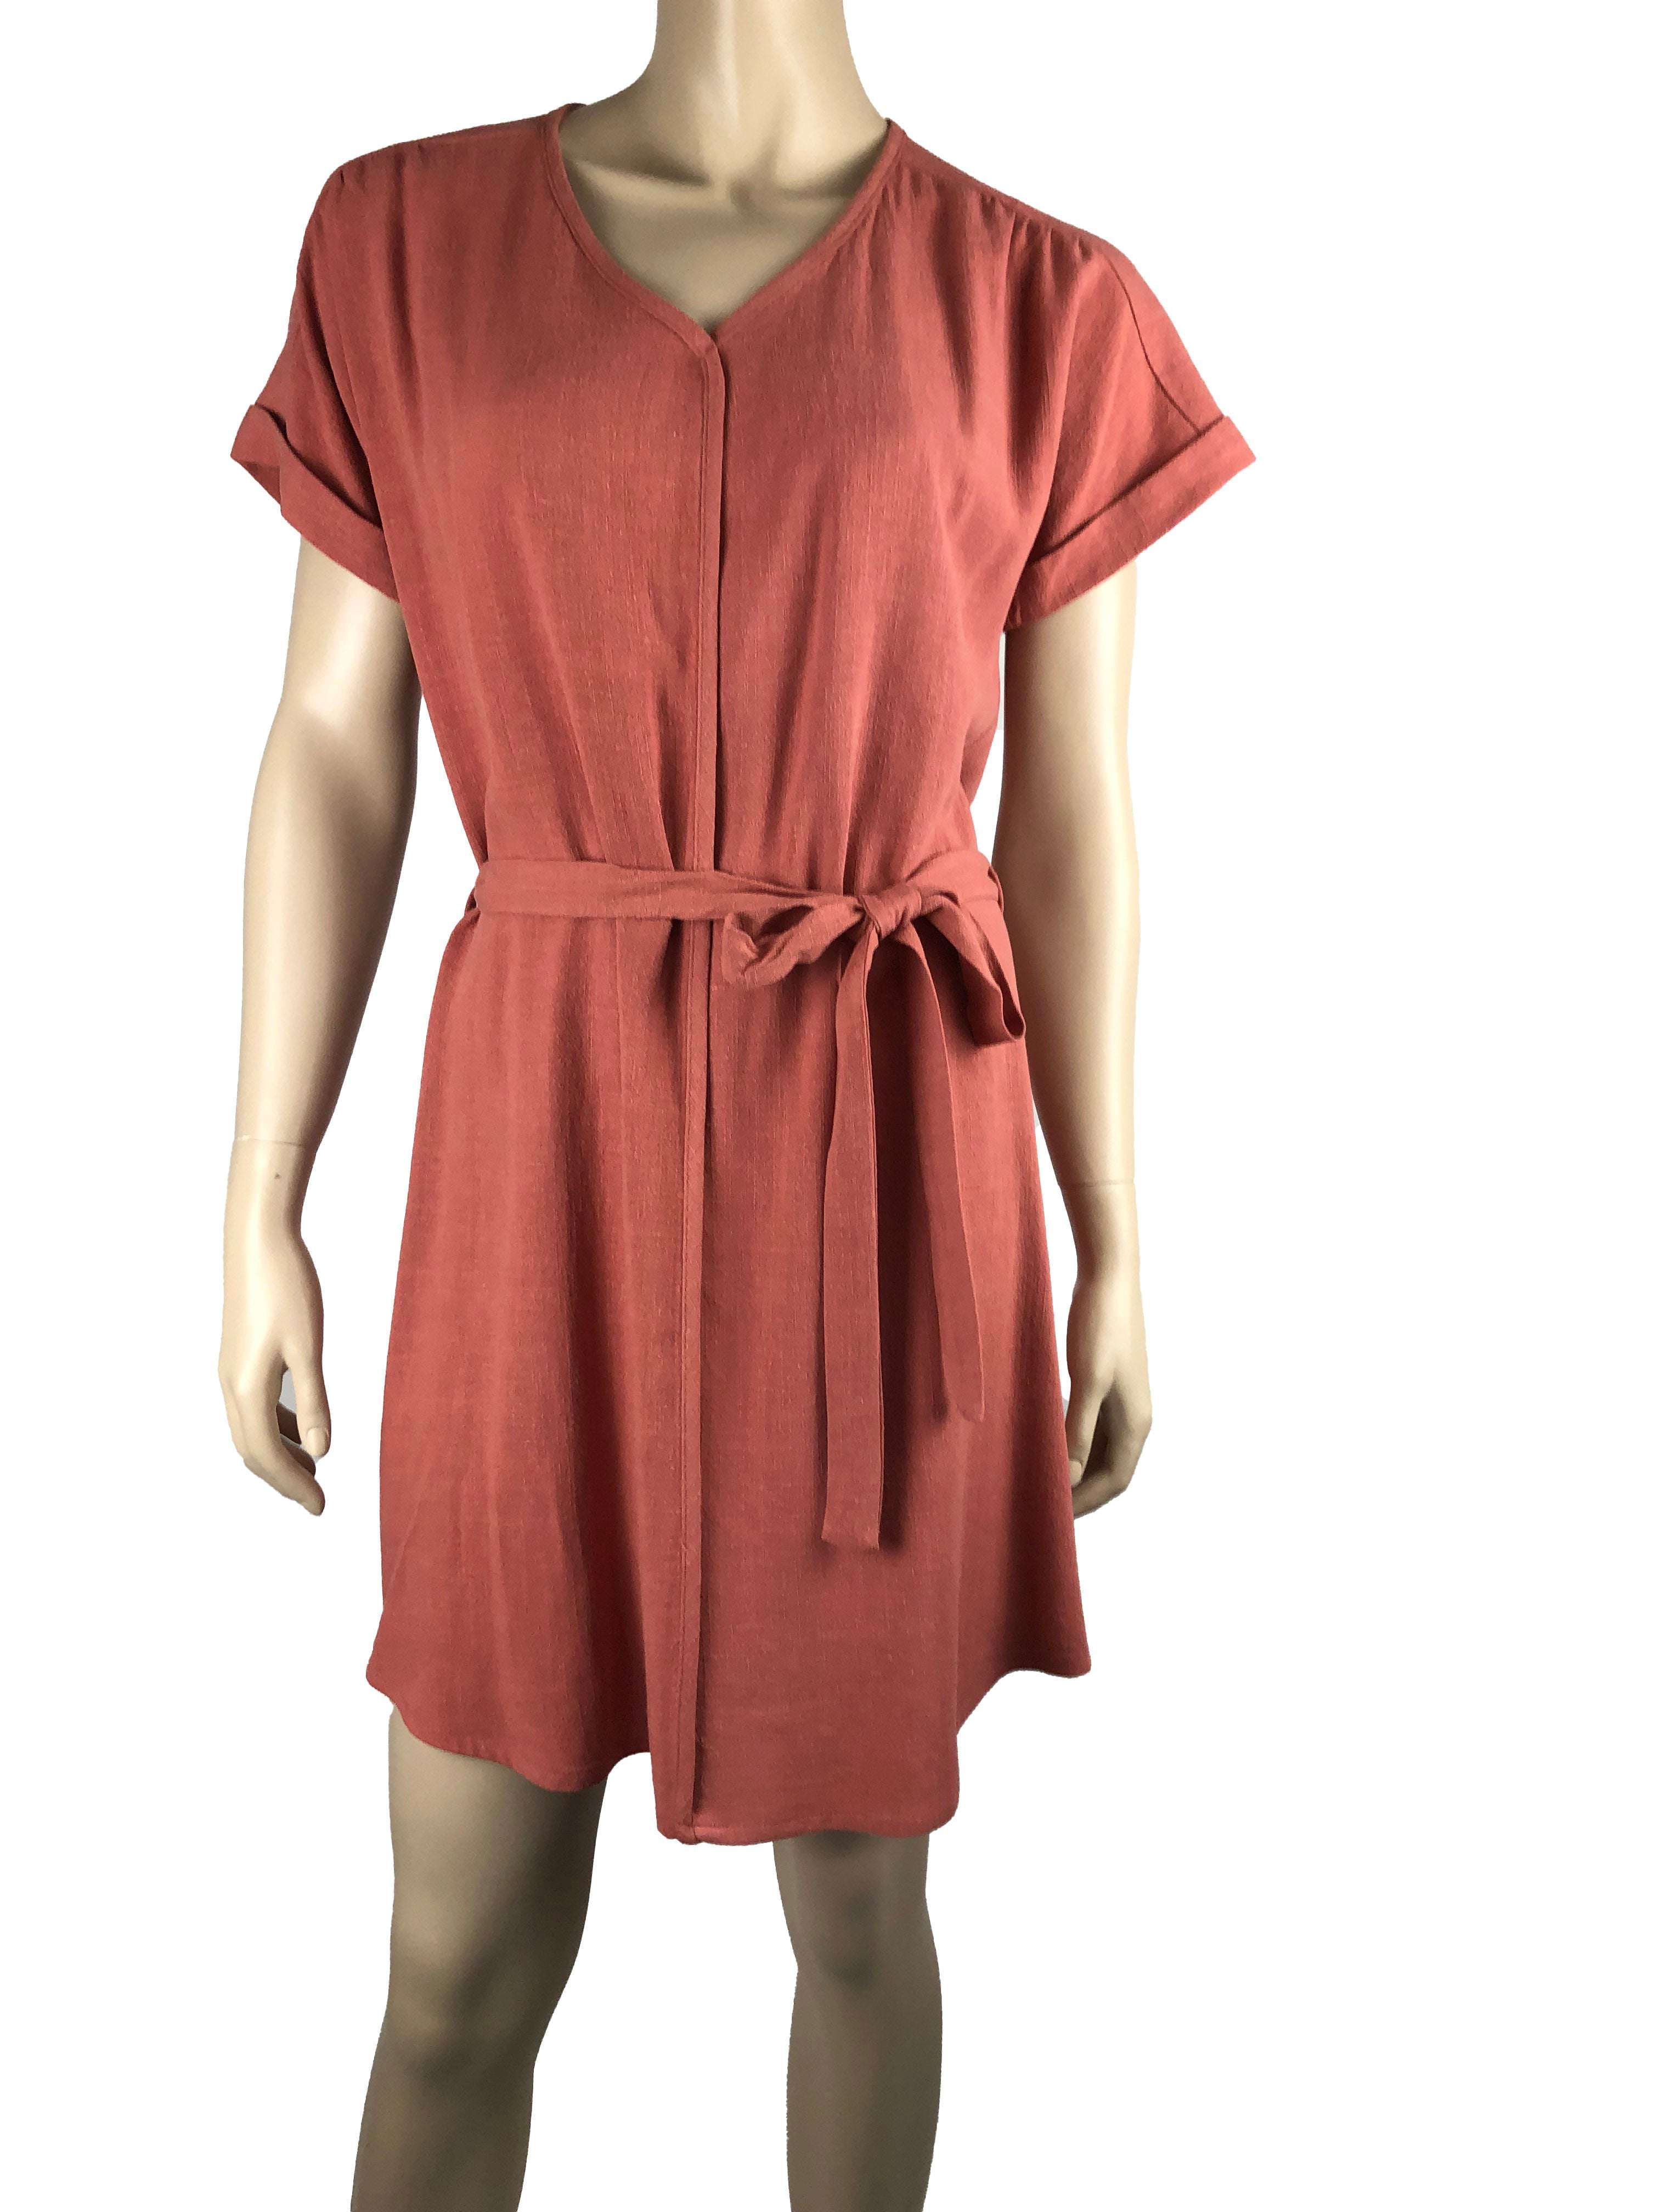 Women's Dresses On Sale Classic Shirtdress Travel Friendly Comfort Dress Terra Cotta Color Quality fabric made in Canada - Yvonne Marie - Yvonne Marie